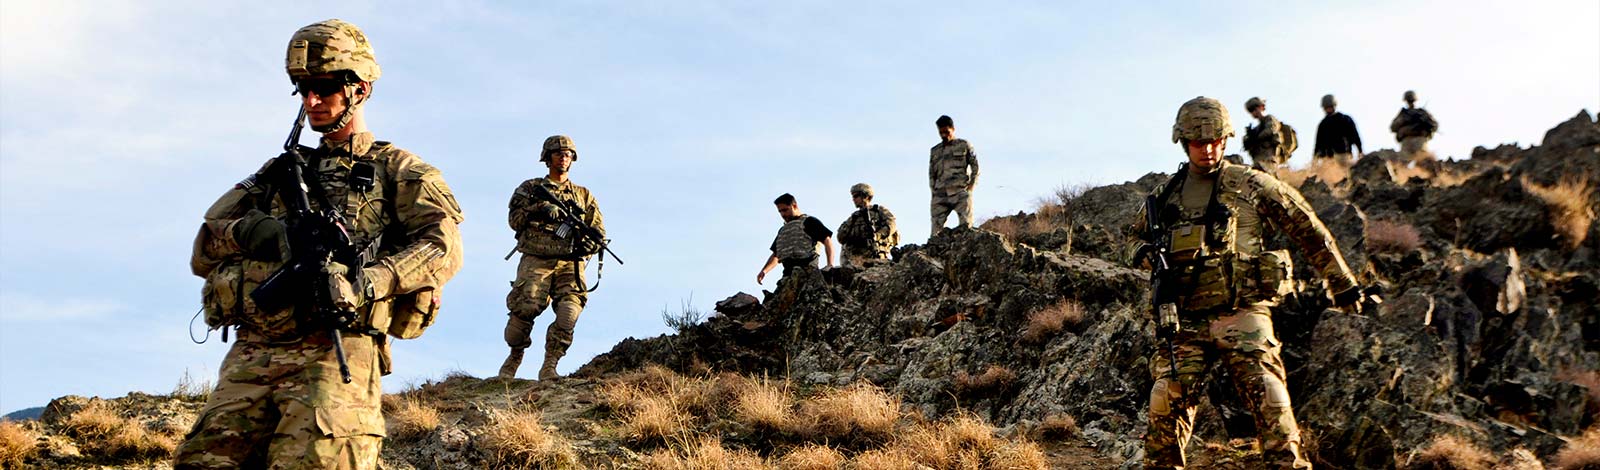 U.S. Army Features Army 101 | Explore Army Culture, Professions and Programs